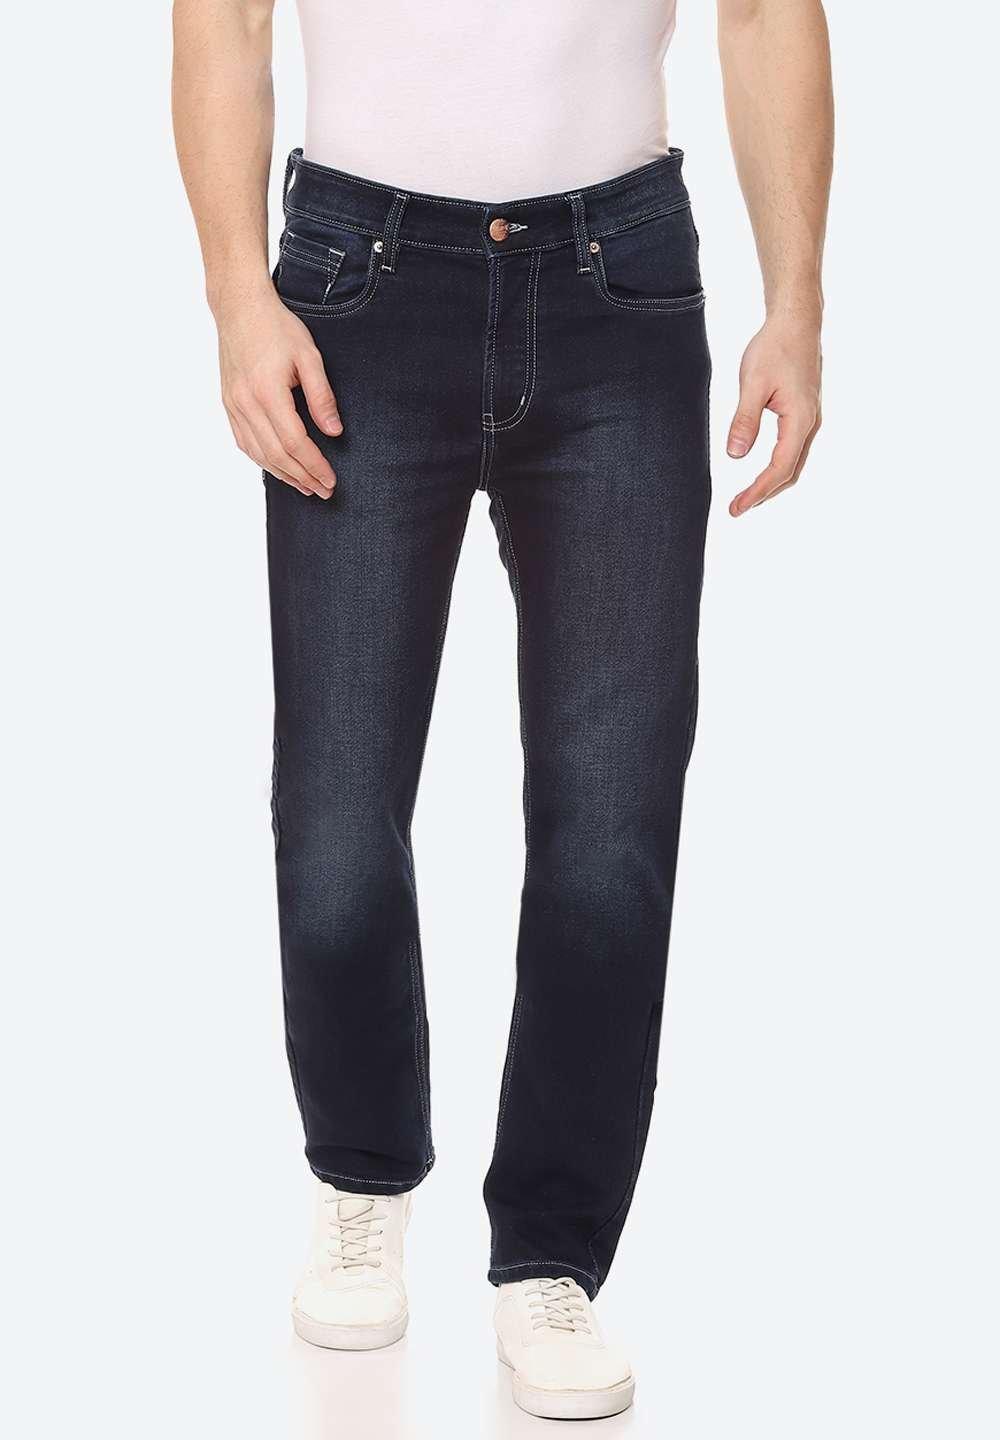 Men Jeans For Men - Buy Jeans For Men Online With Discounted Pricing At  Ketch